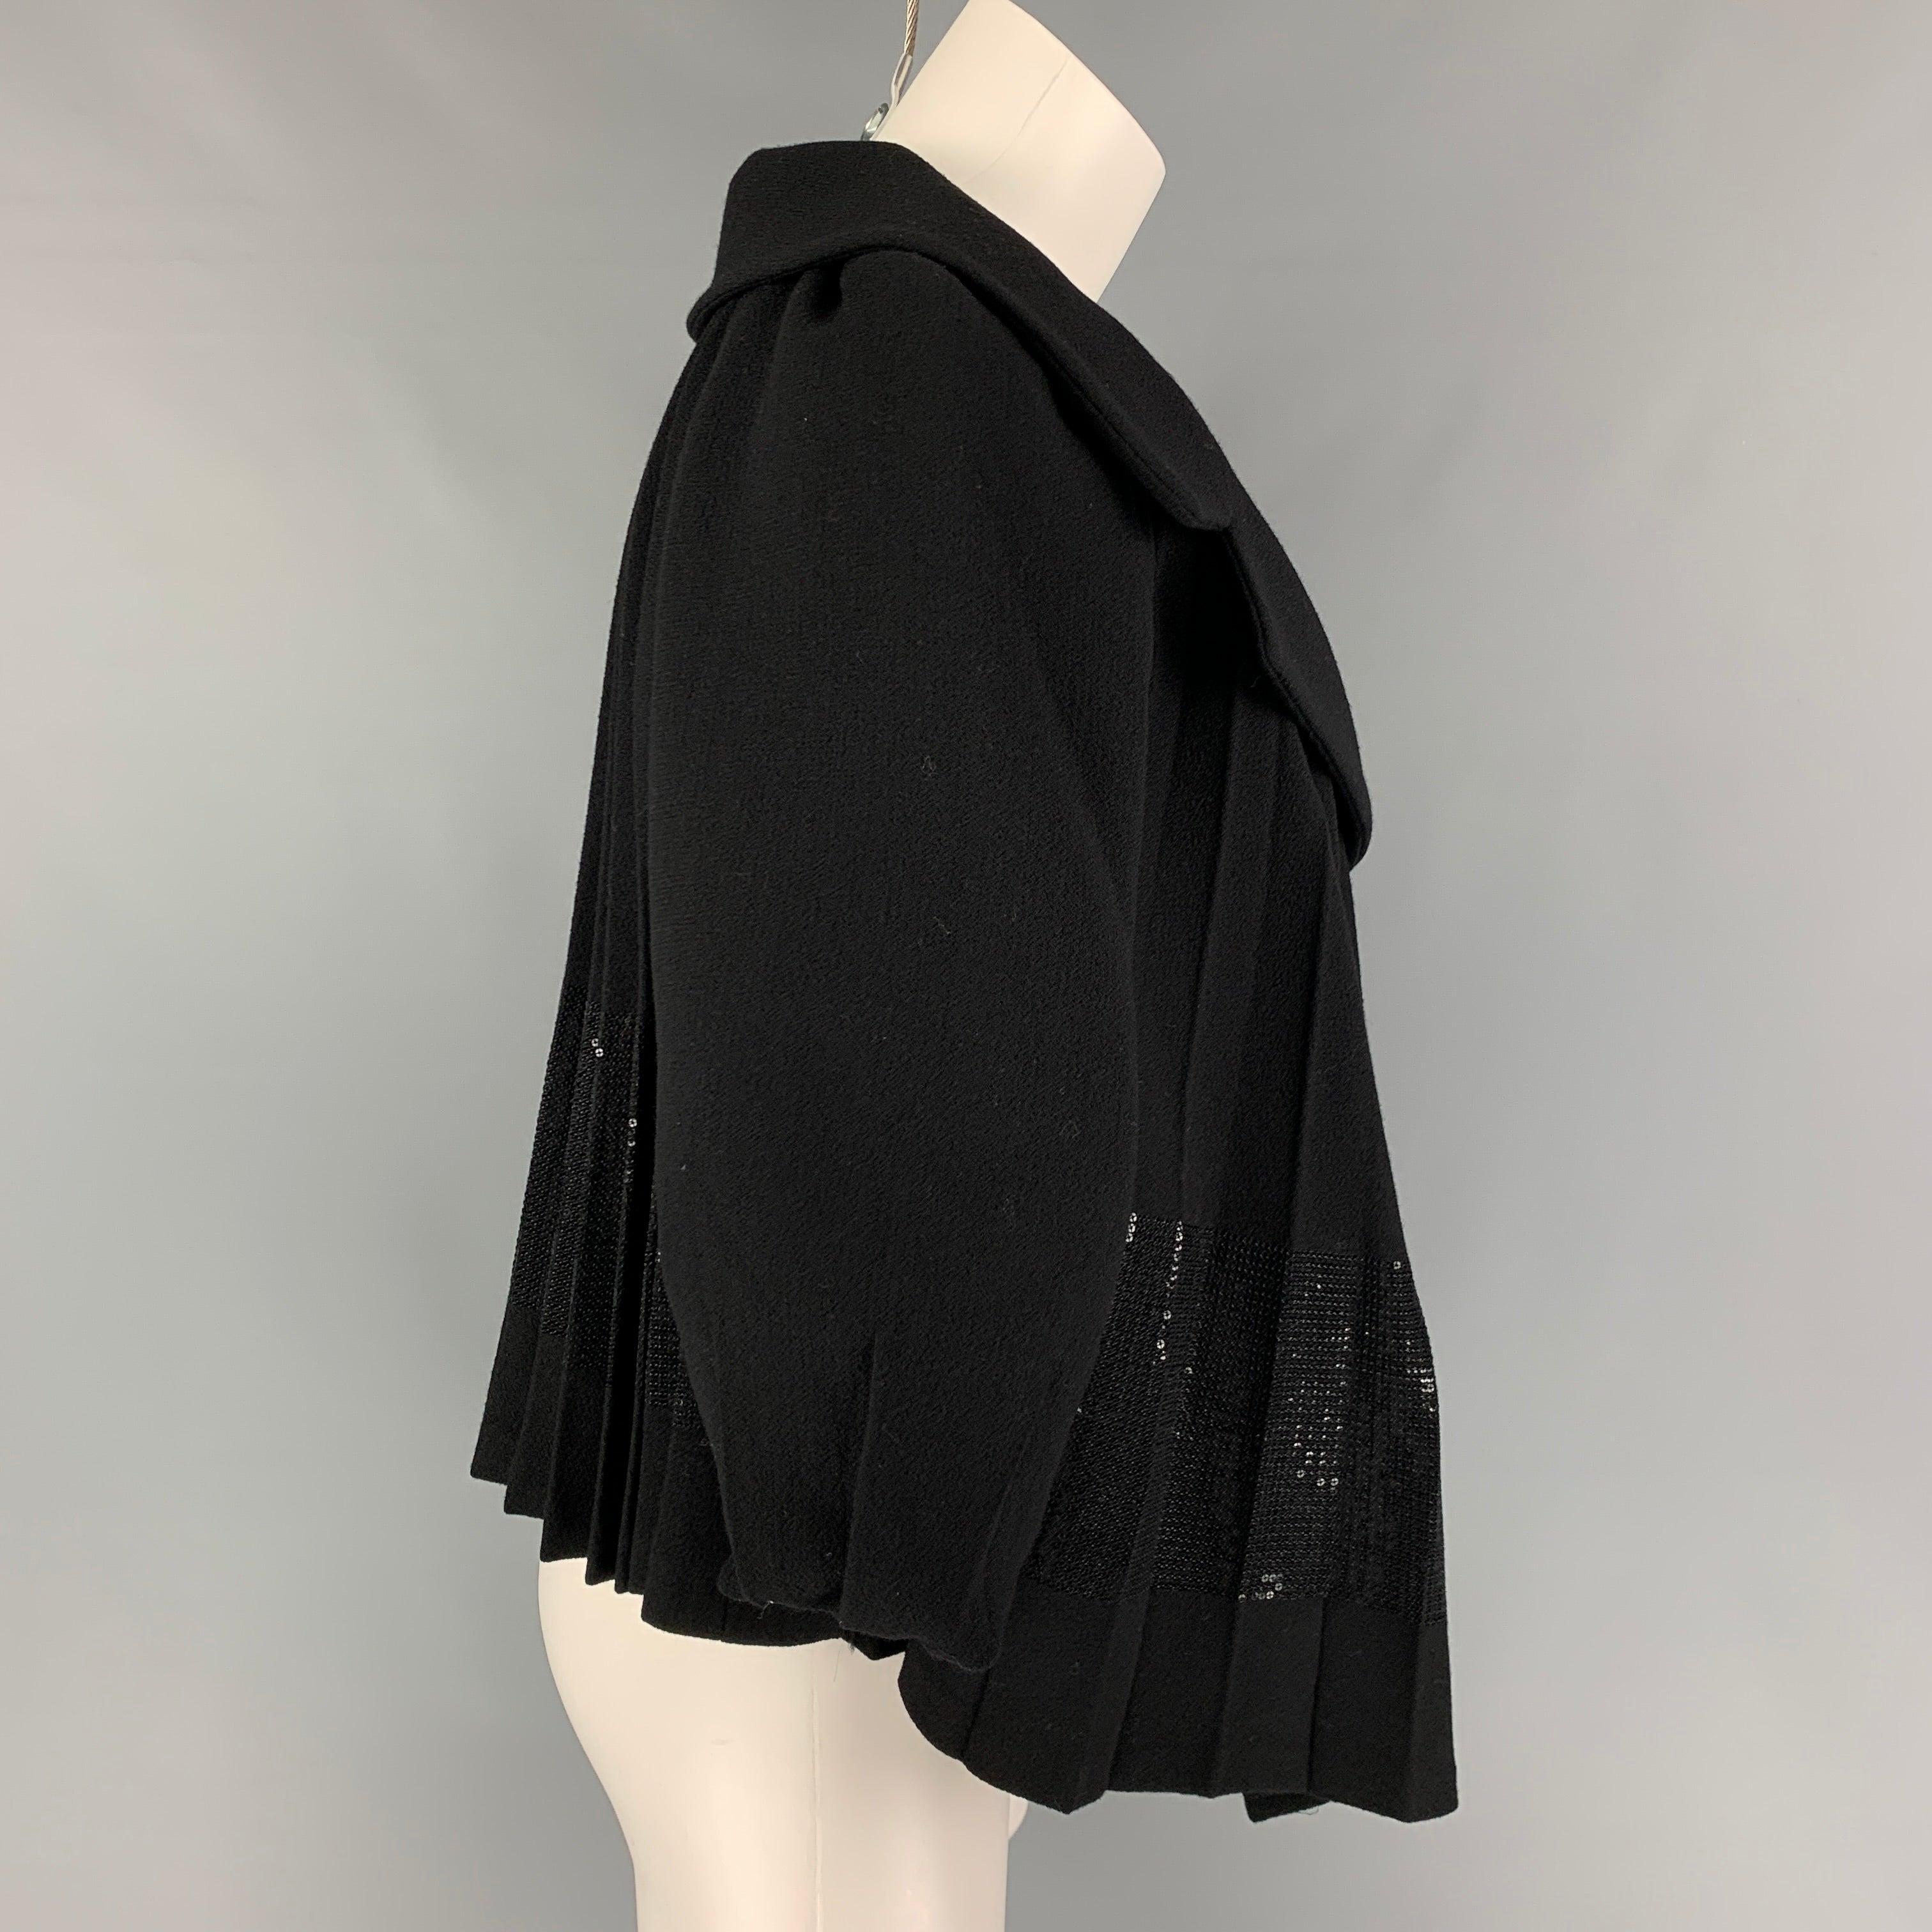 GIAMBATTISTA VALLI jacket comes in a black virgin wool featuring a pleated style, large notch lapel, sequined panel, and a snap button closure. Made in Italy.
Very Good
Pre-Owned Condition. 

Marked:   40/XS 

Measurements: 
 
Shoulder: 17 inches 